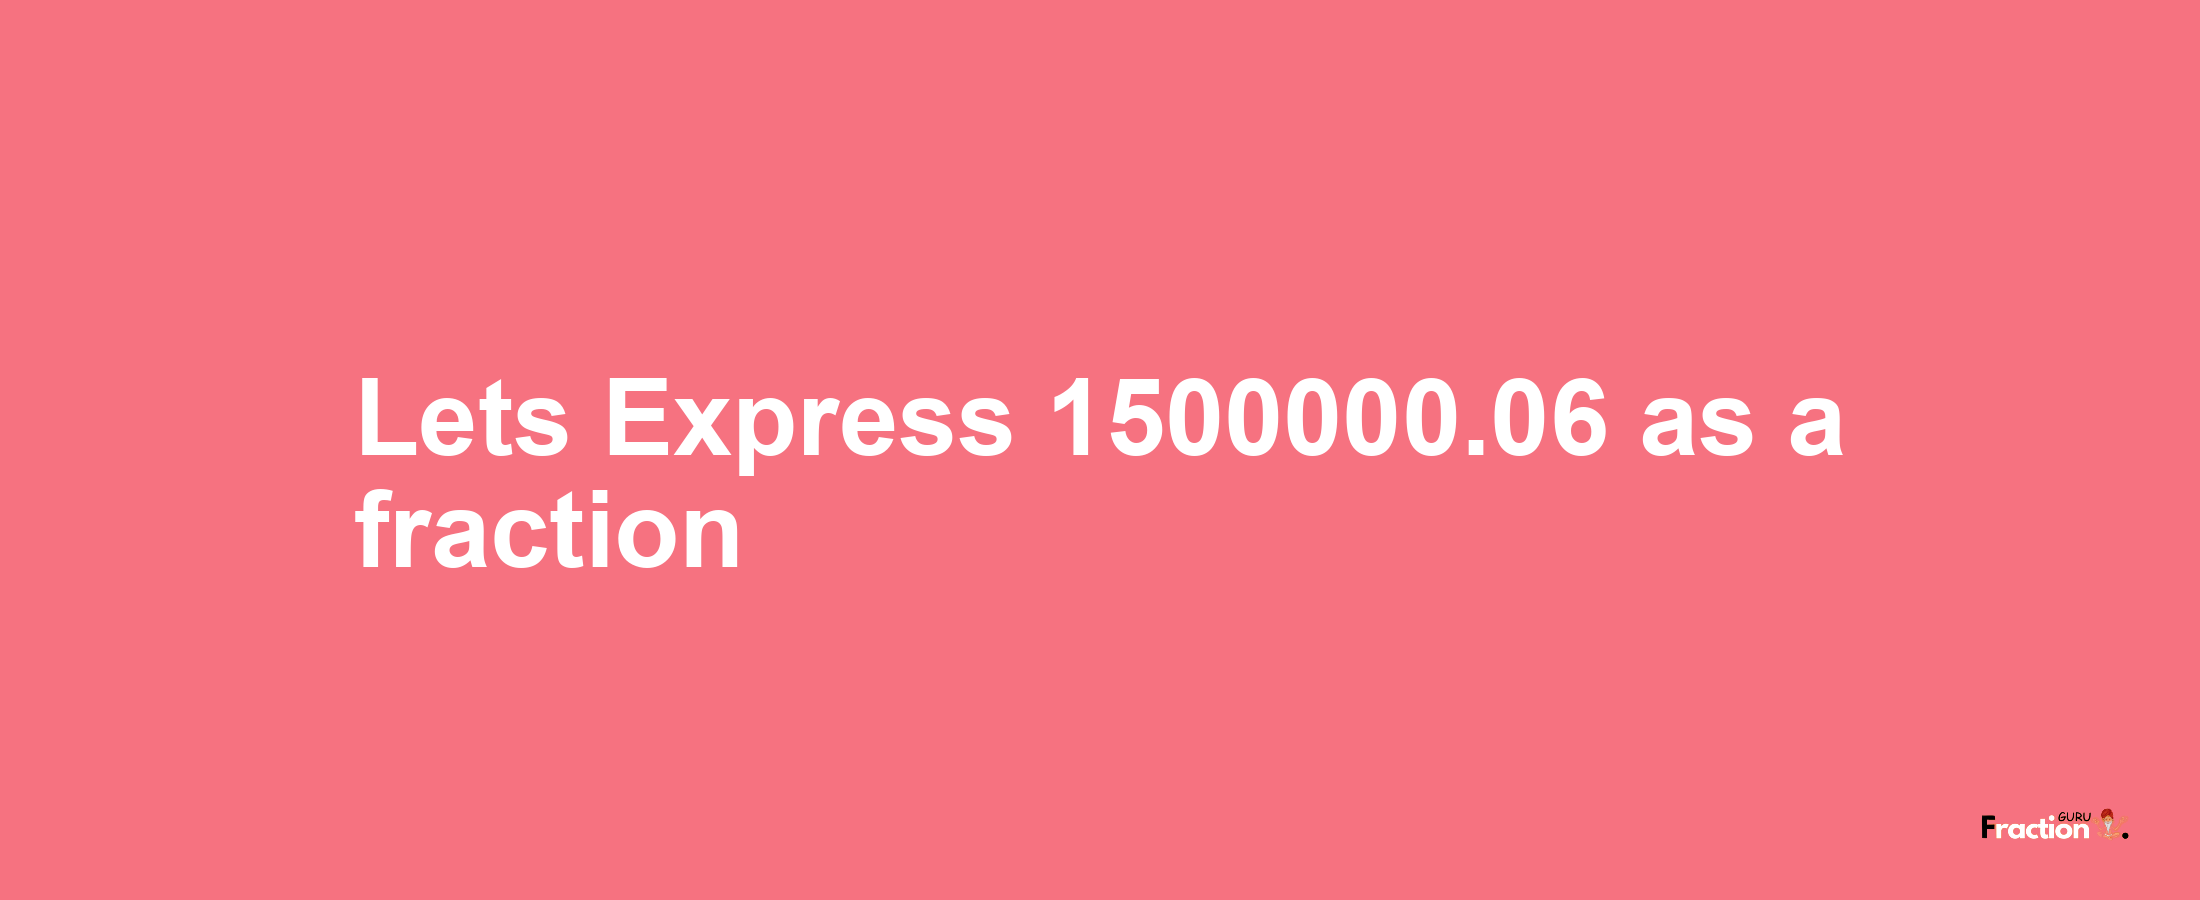 Lets Express 1500000.06 as afraction